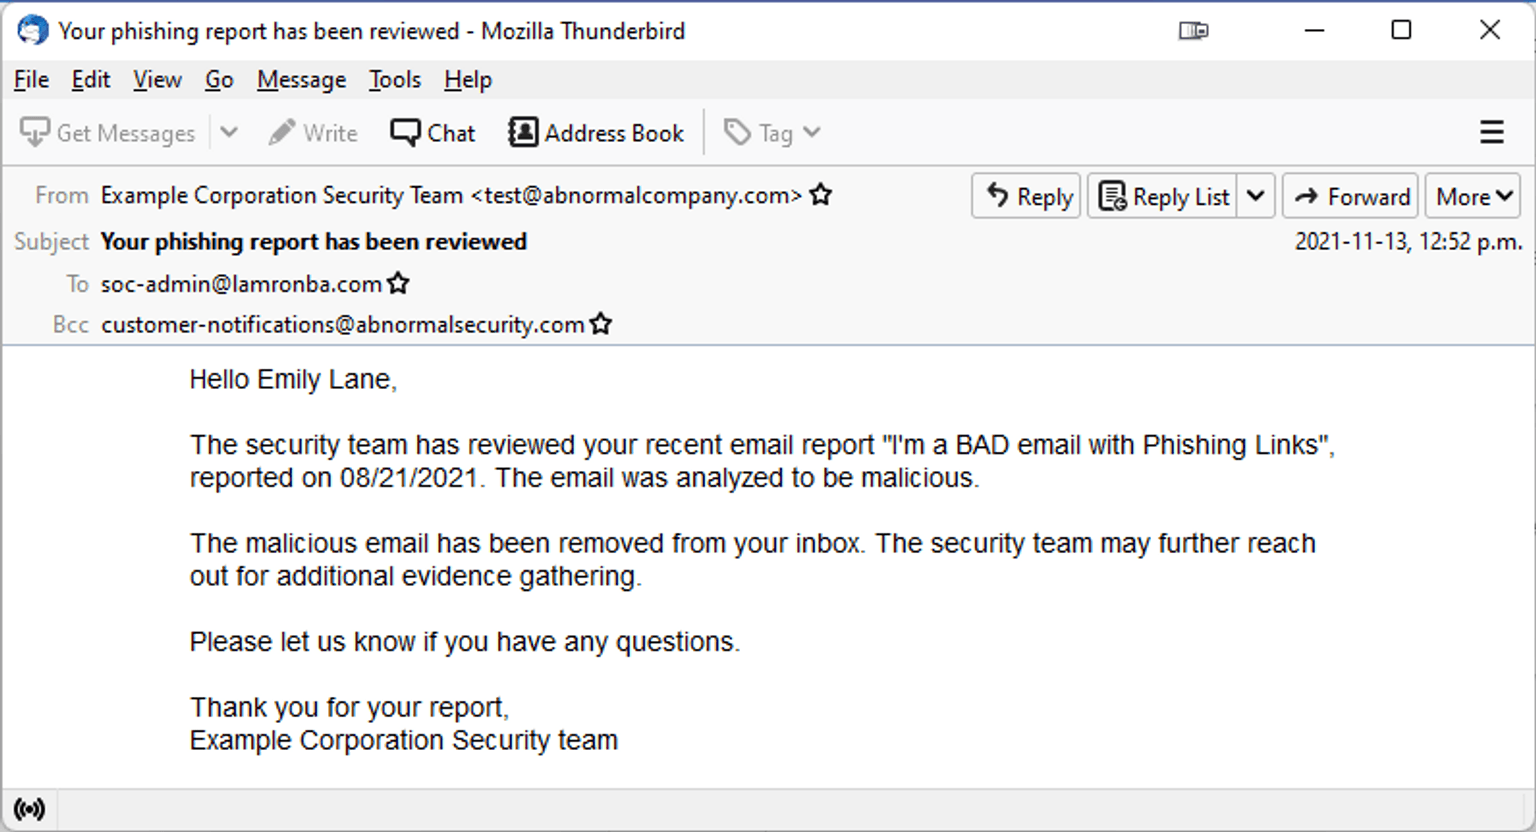 A sample response to a phishing report